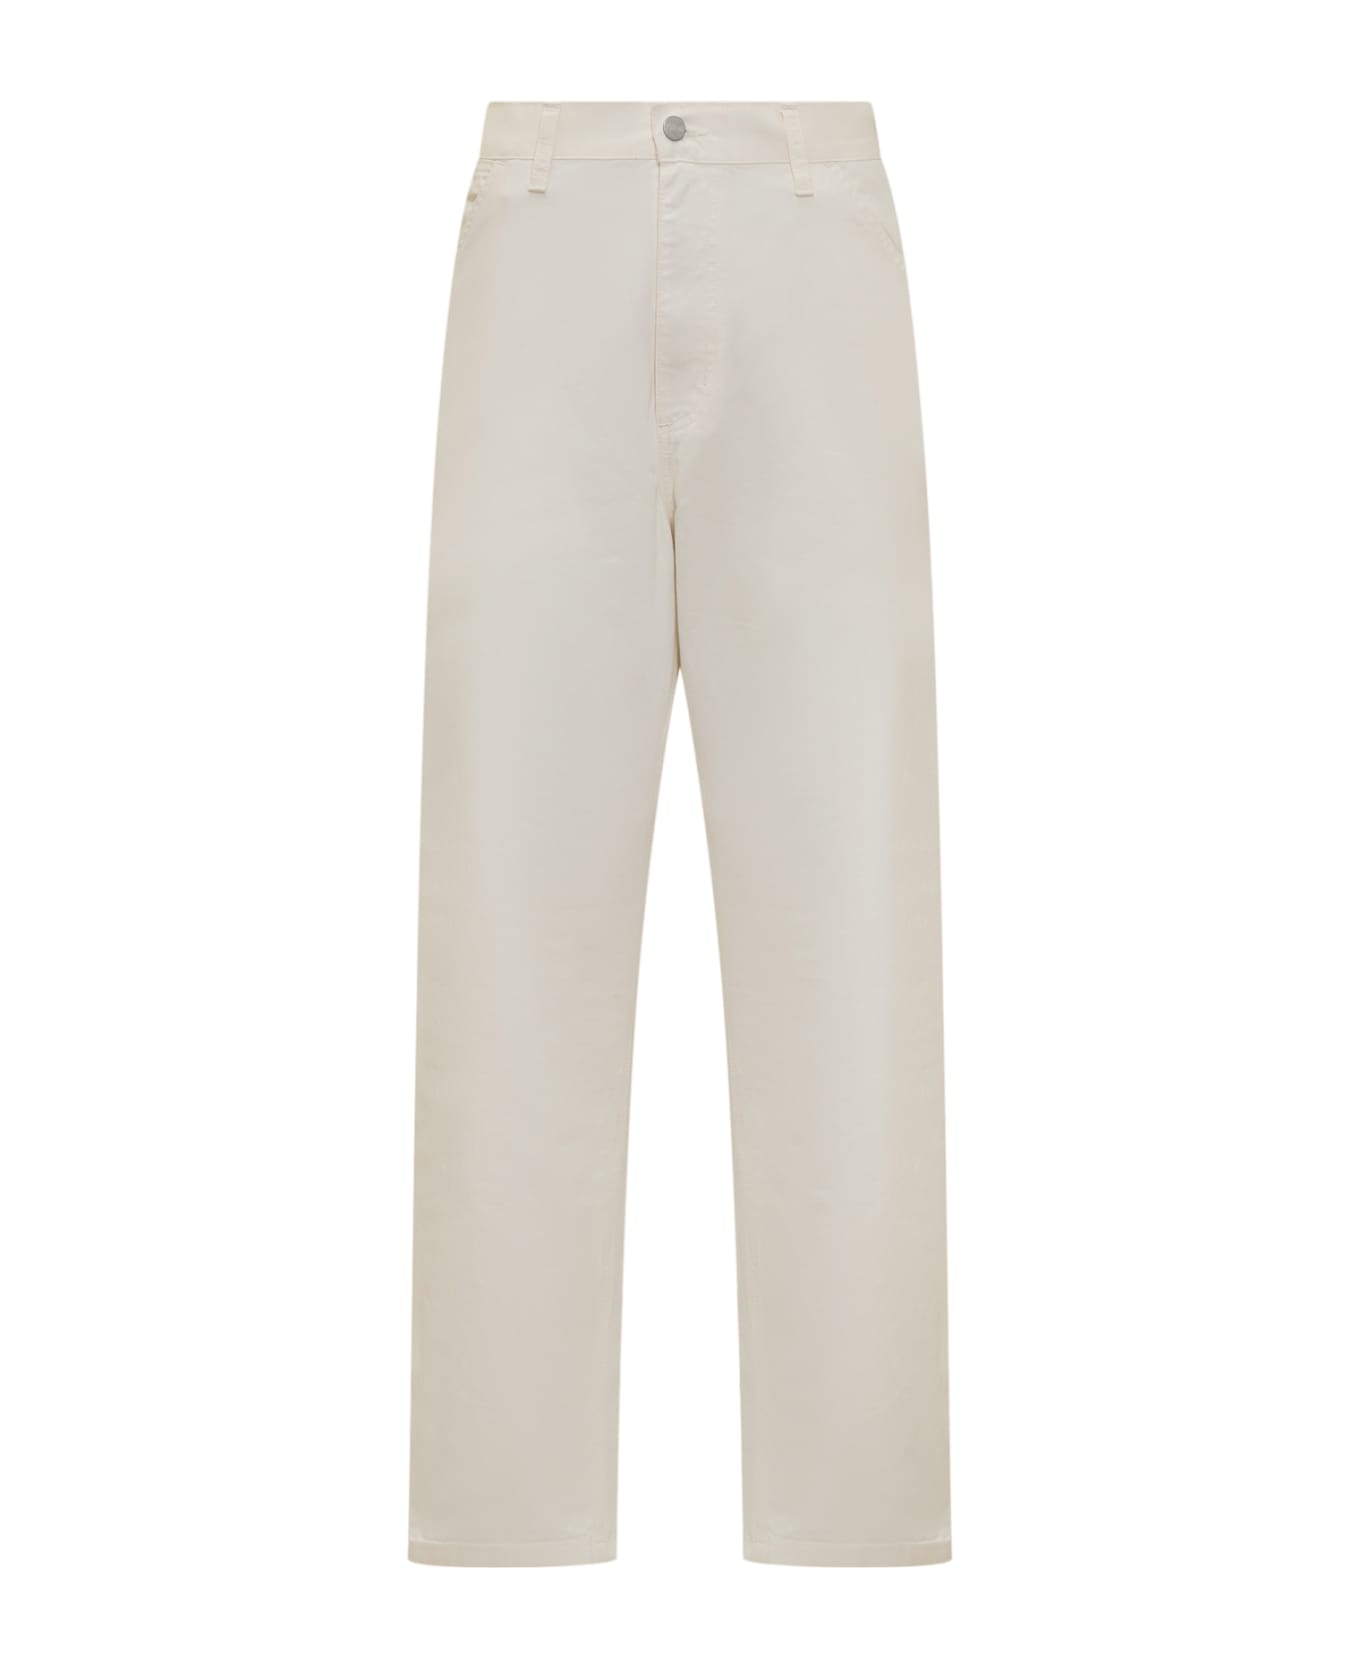 Carhartt Trousers - Off White Rinsed